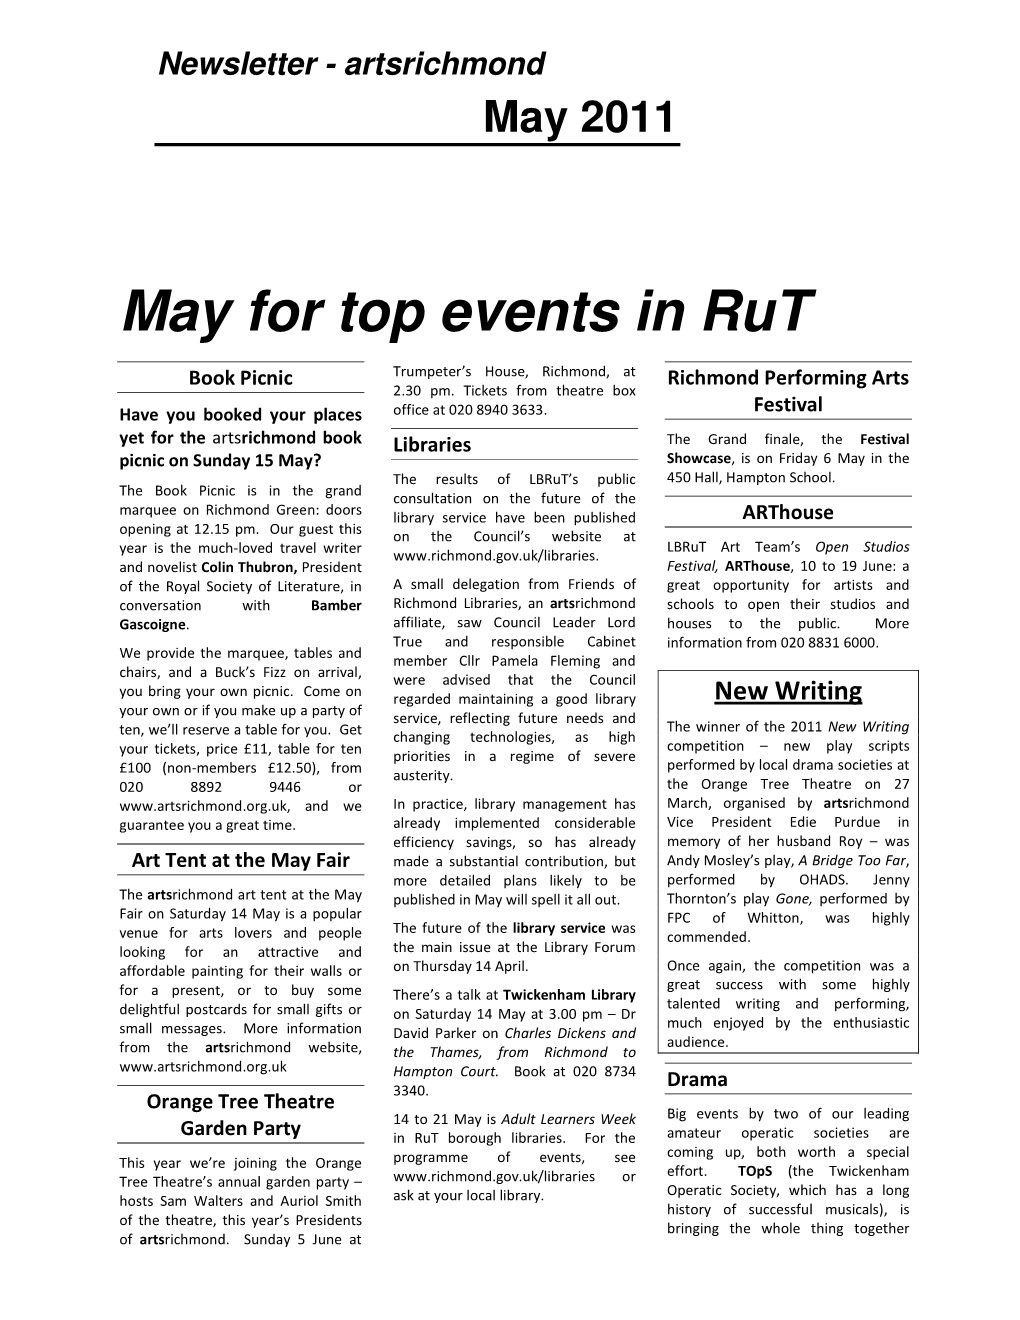 May for Top Events in Rut